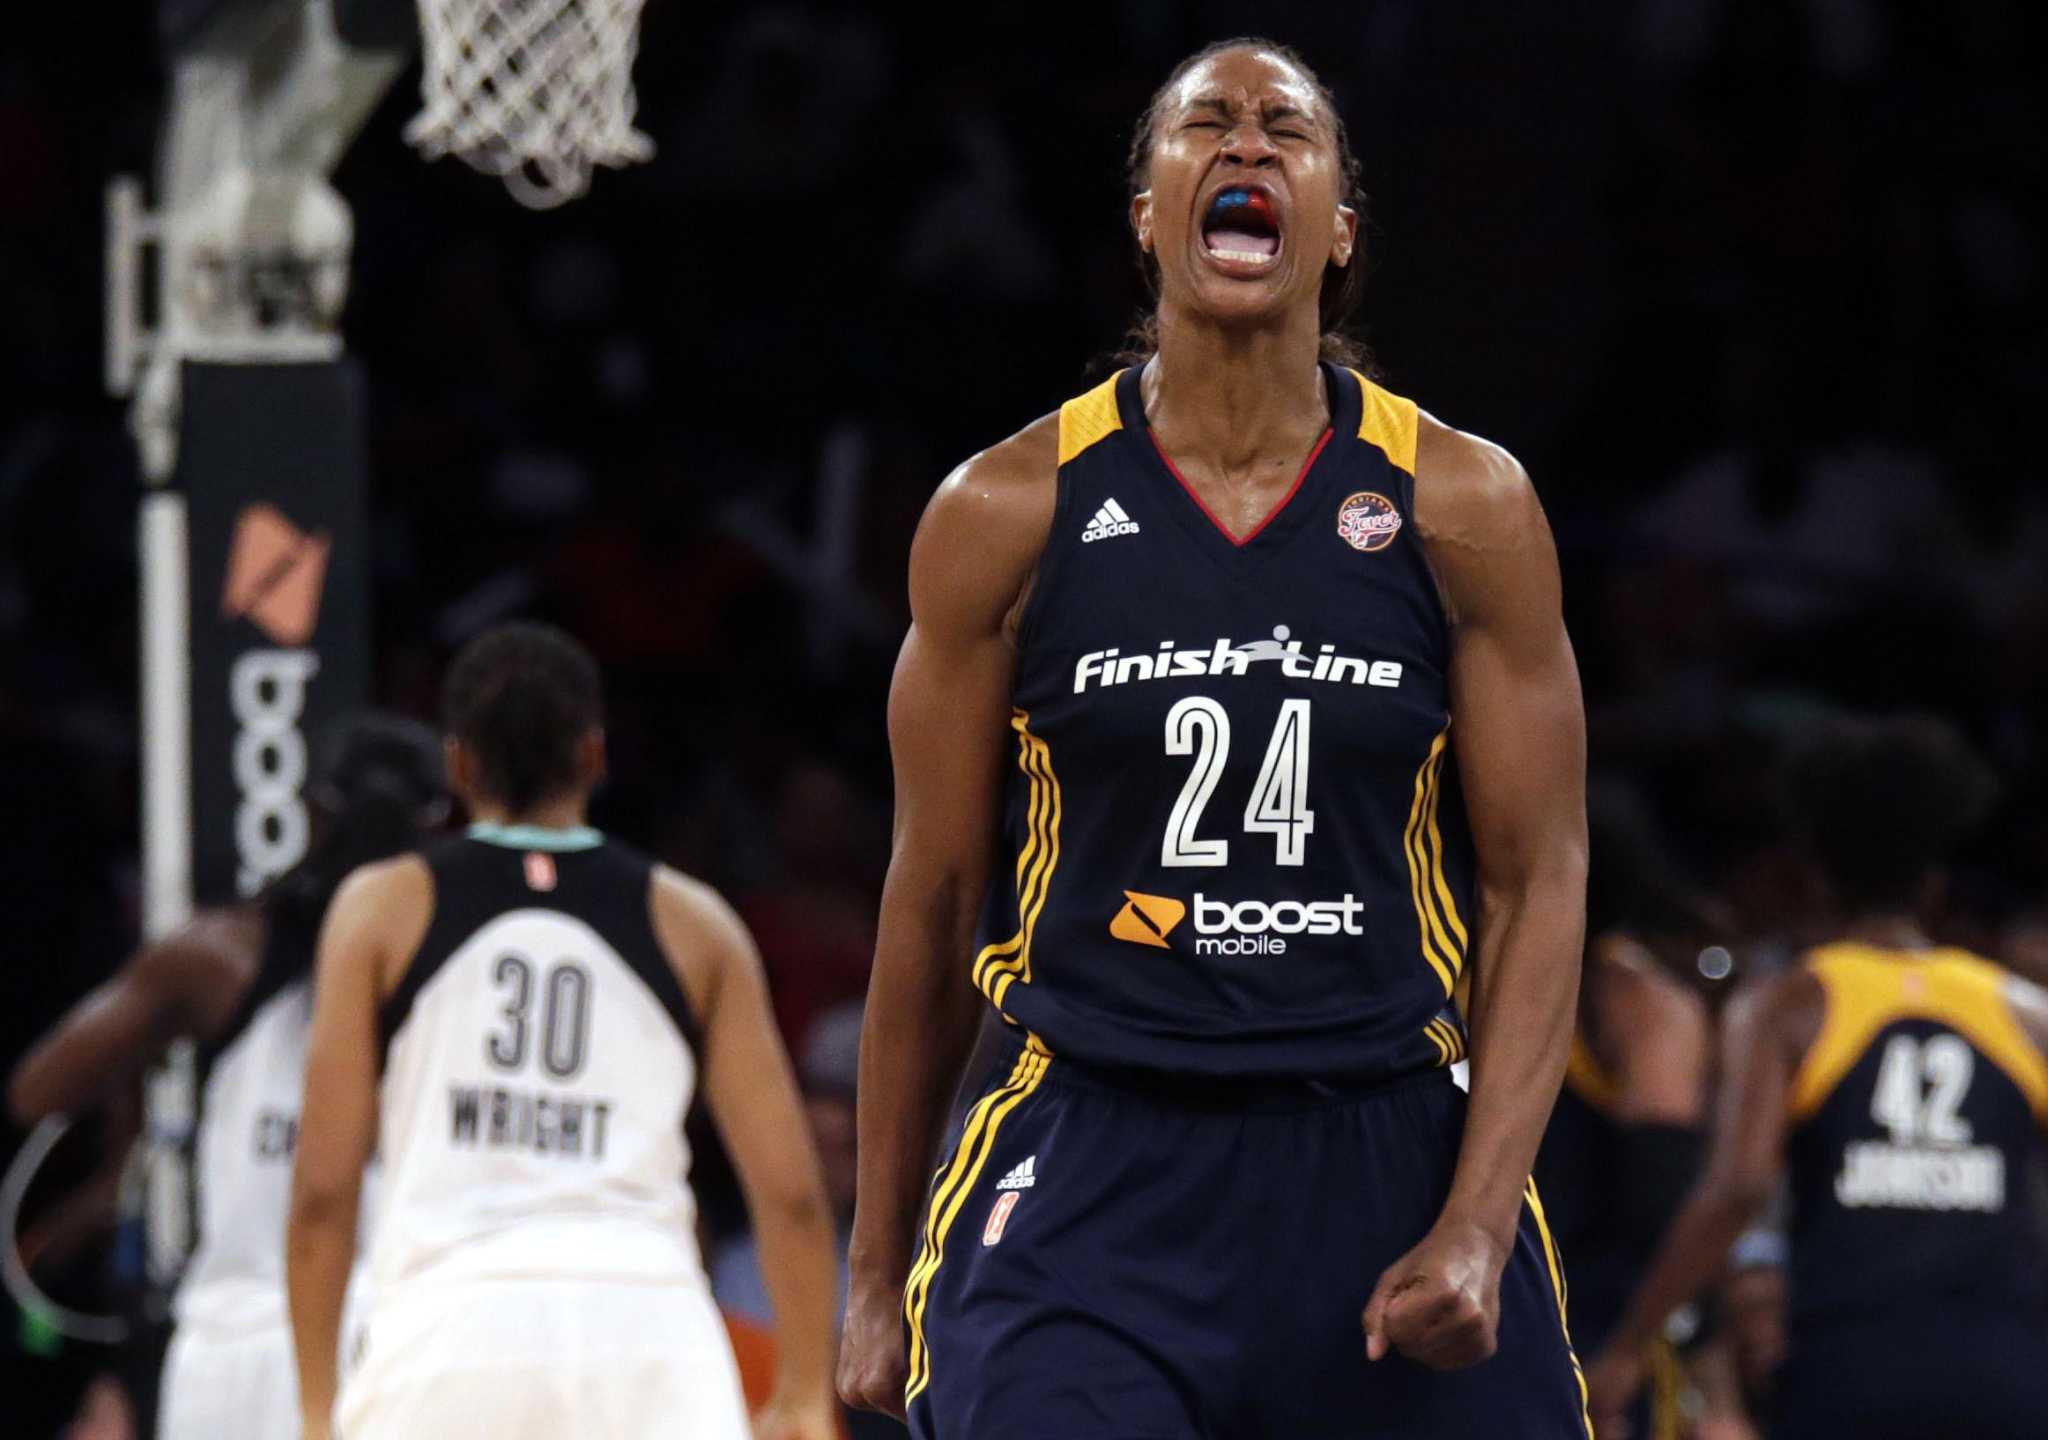 Indiana Fever's Tamika Catchings elected to Naismith Basketball Hall of Fame